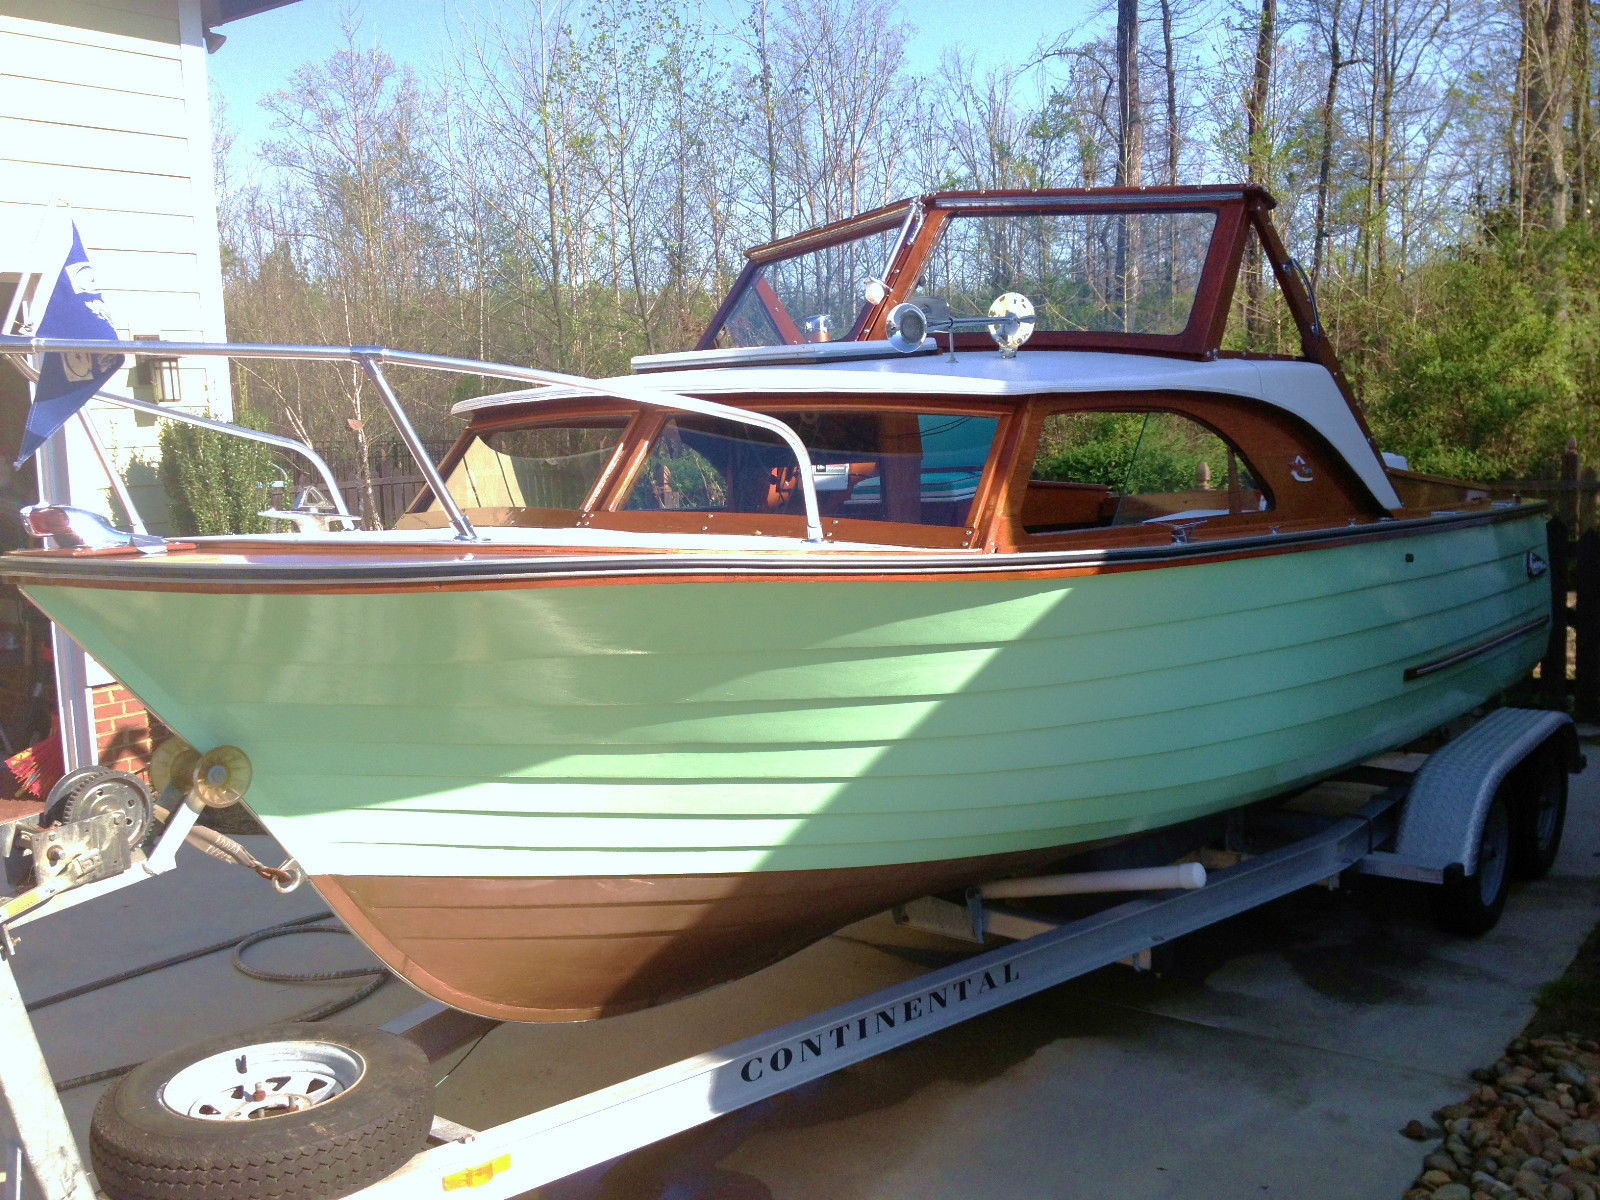 Cruisers Inc. 570 Sea Camper 1961 for sale for $8,500 